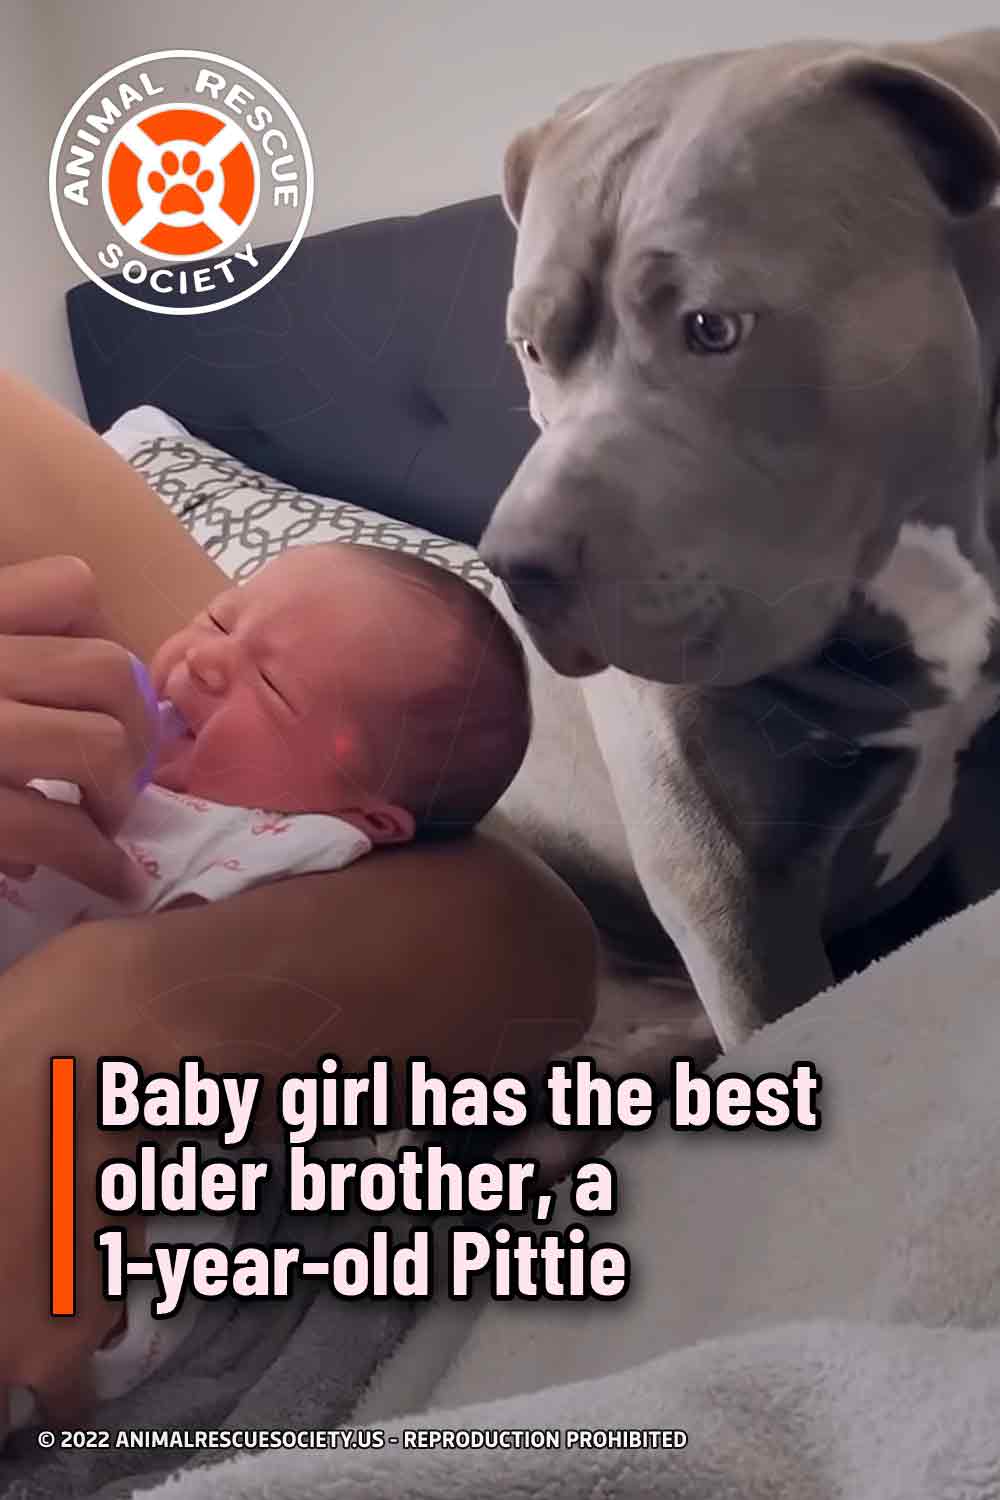 Baby girl has the best older brother, a 1-year-old Pittie